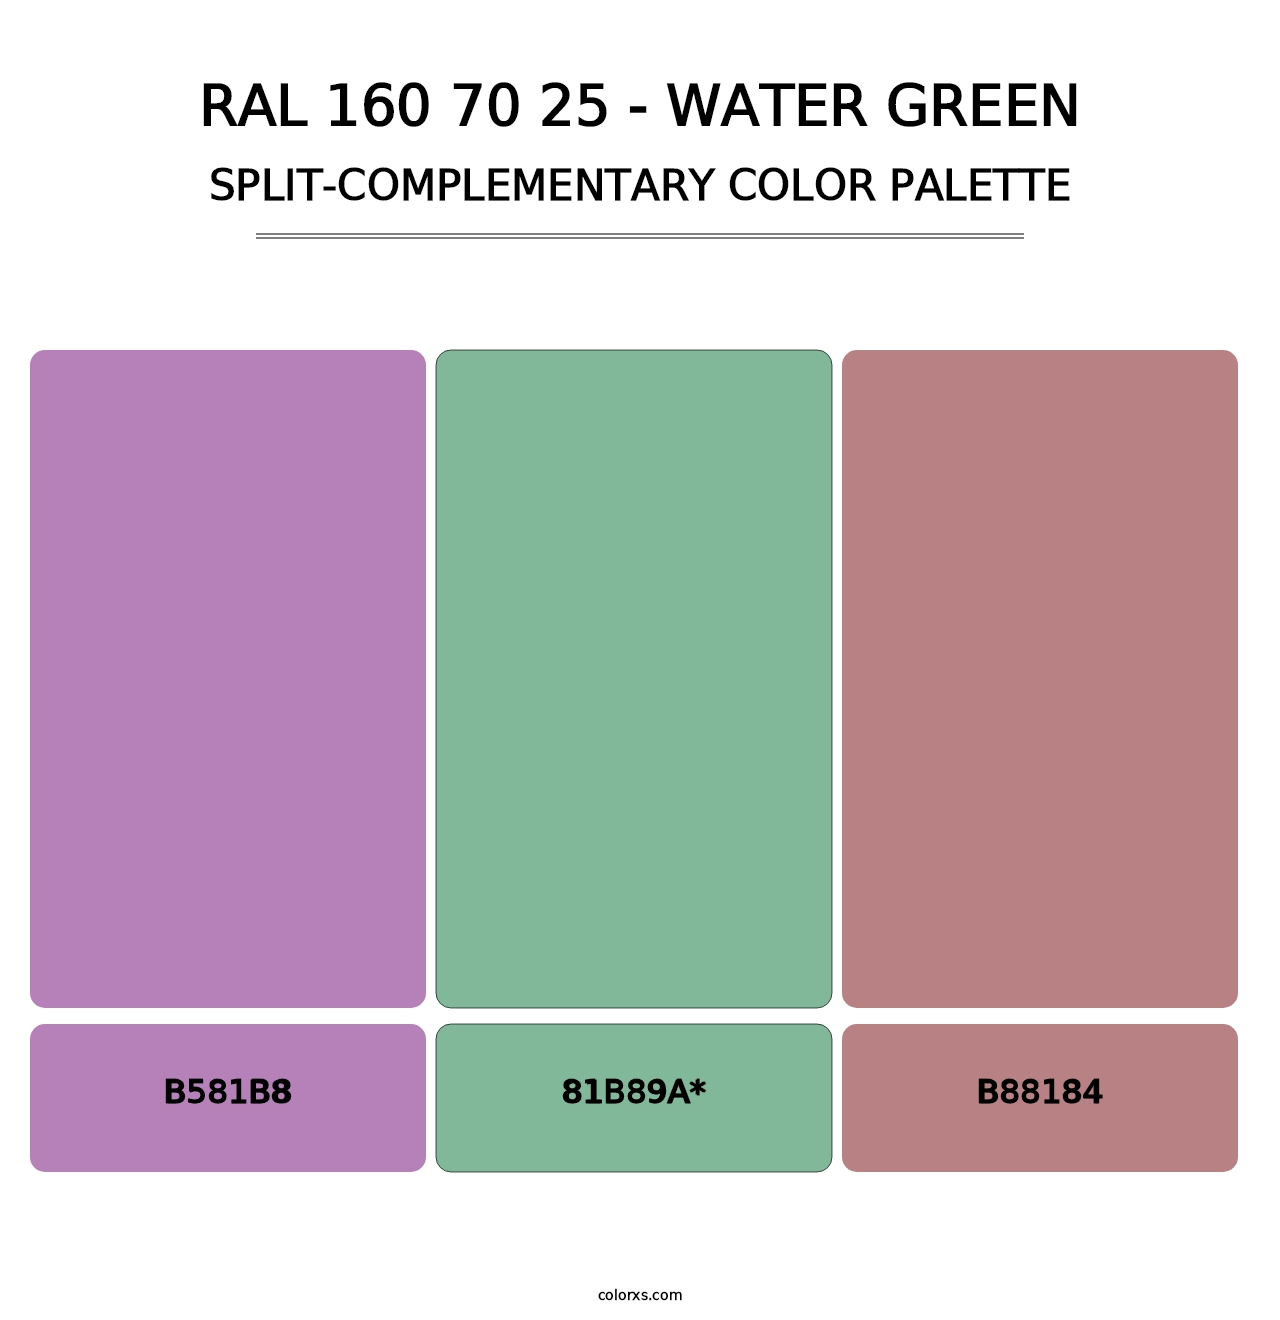 RAL 160 70 25 - Water Green - Split-Complementary Color Palette